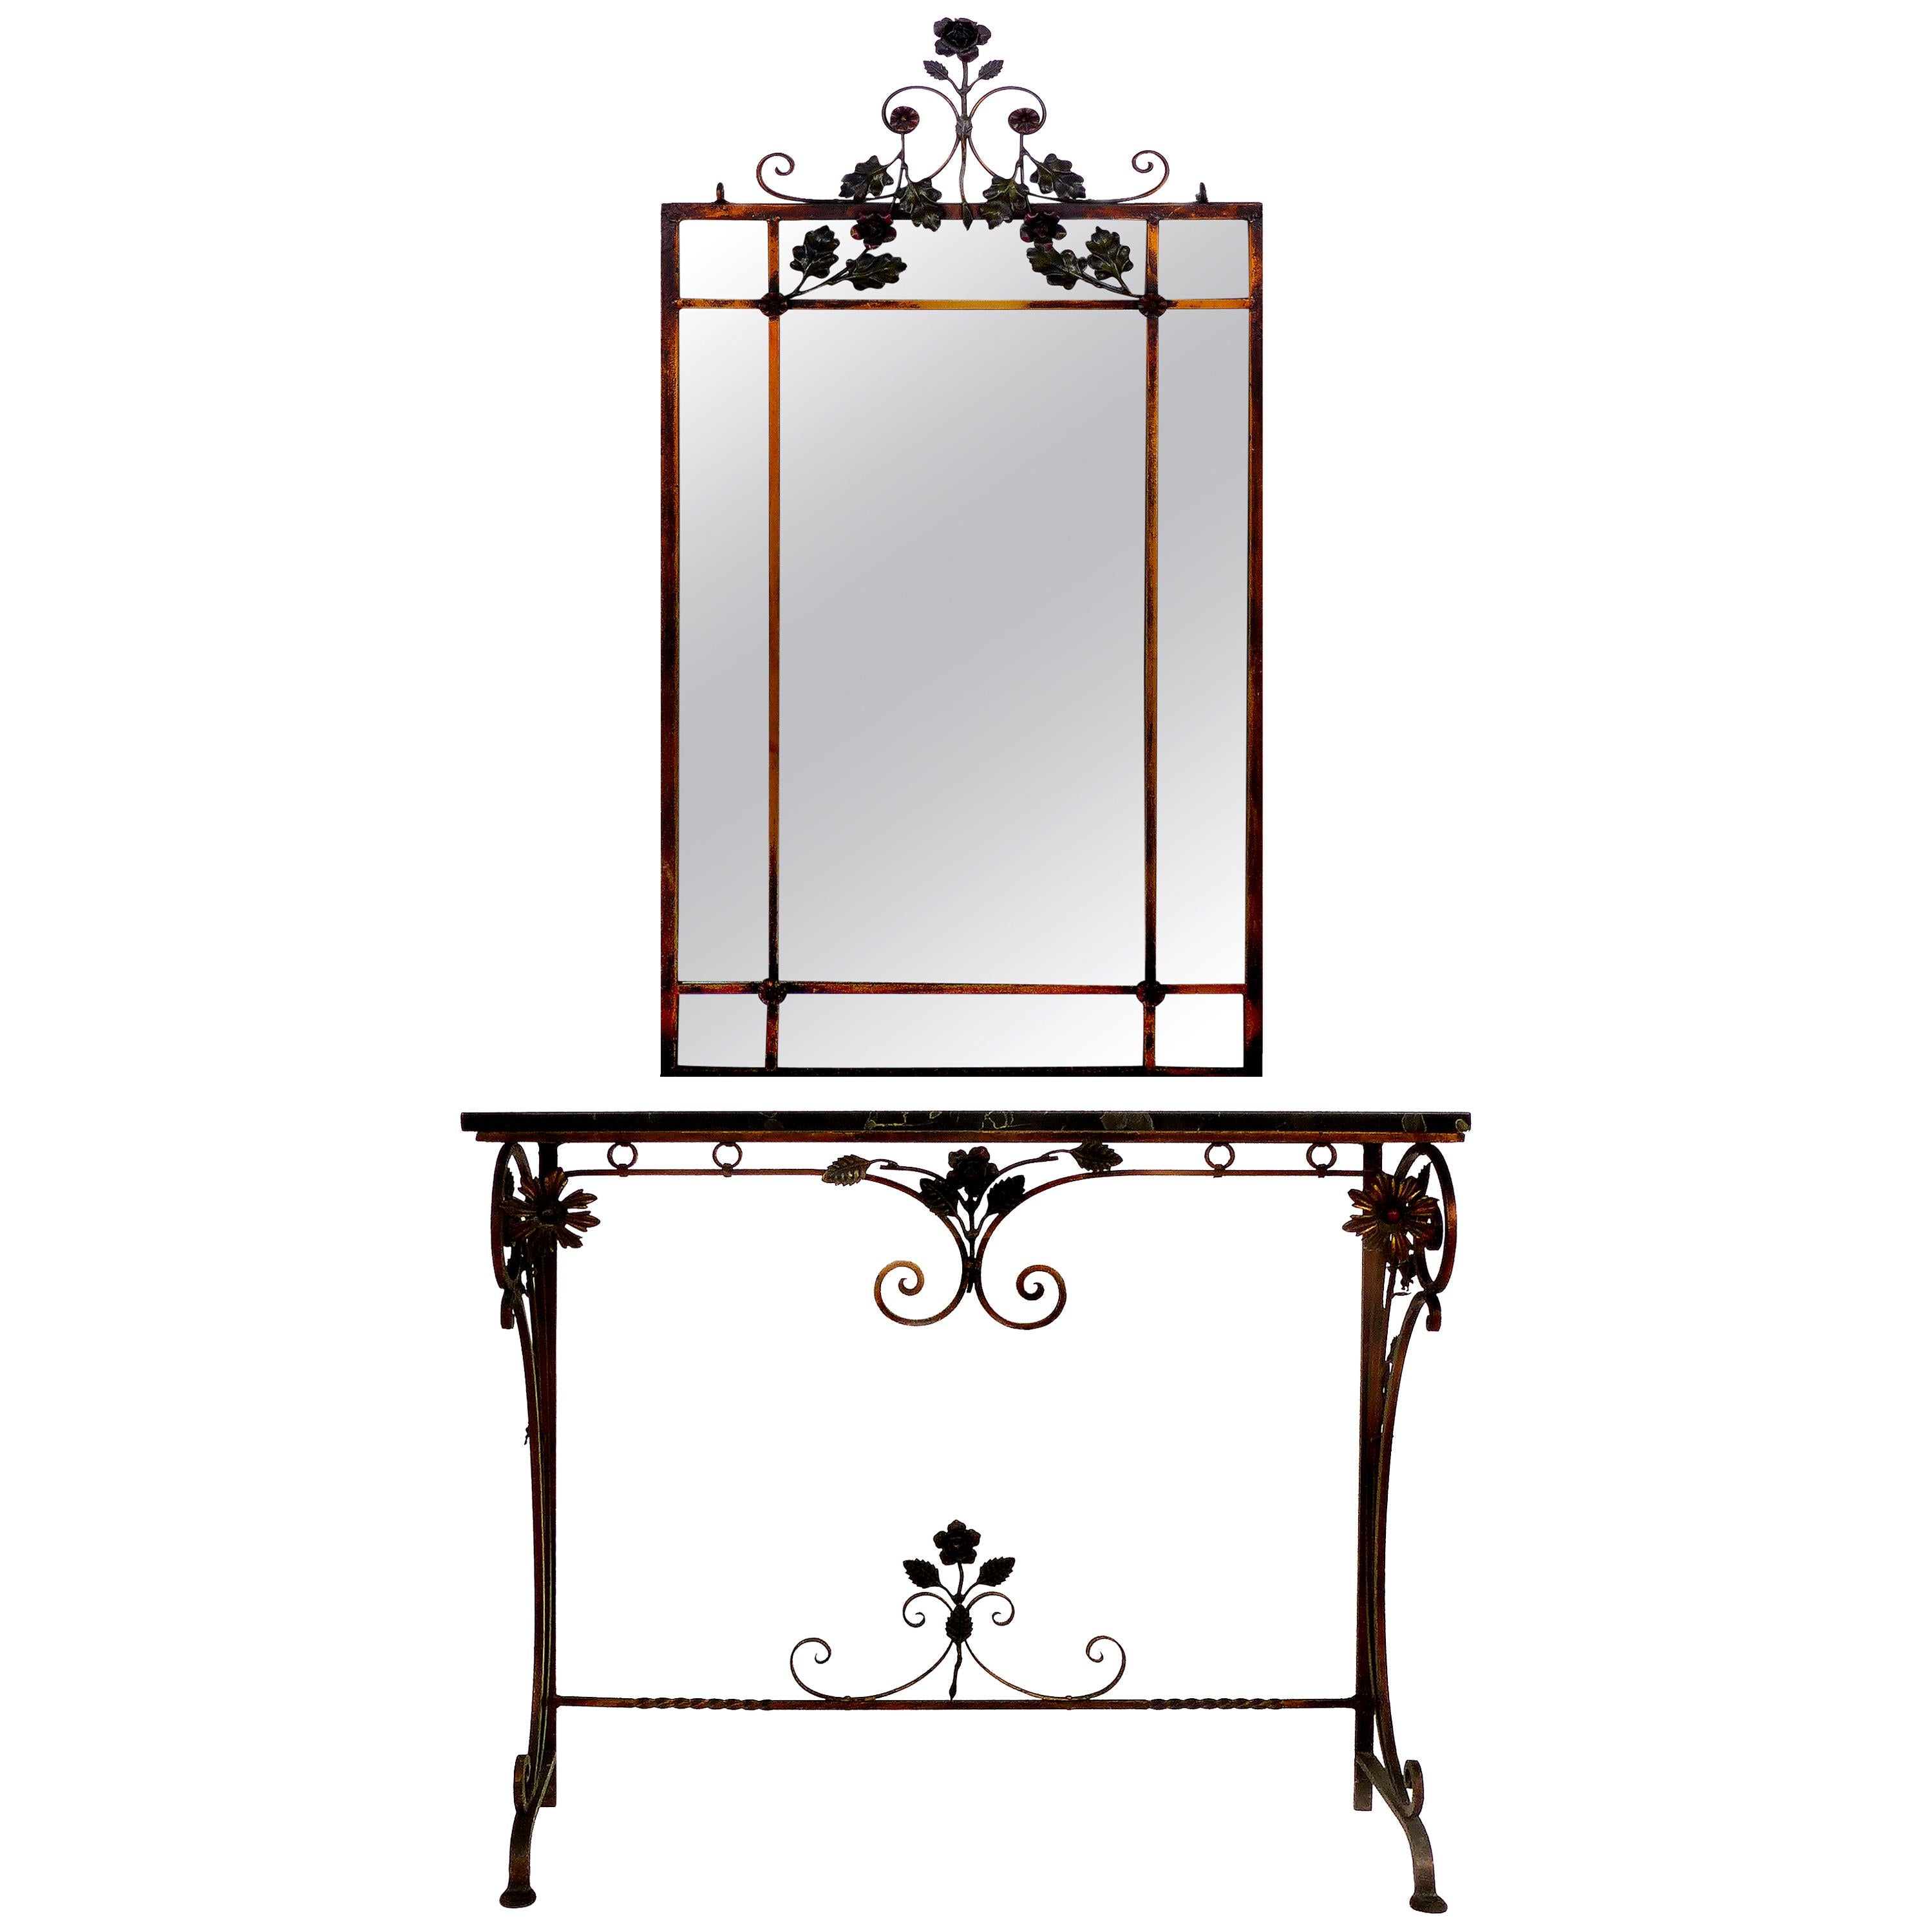 Italian Art Deco Gilt Iron, Polychromed Marble Top Console with Matching Mirror